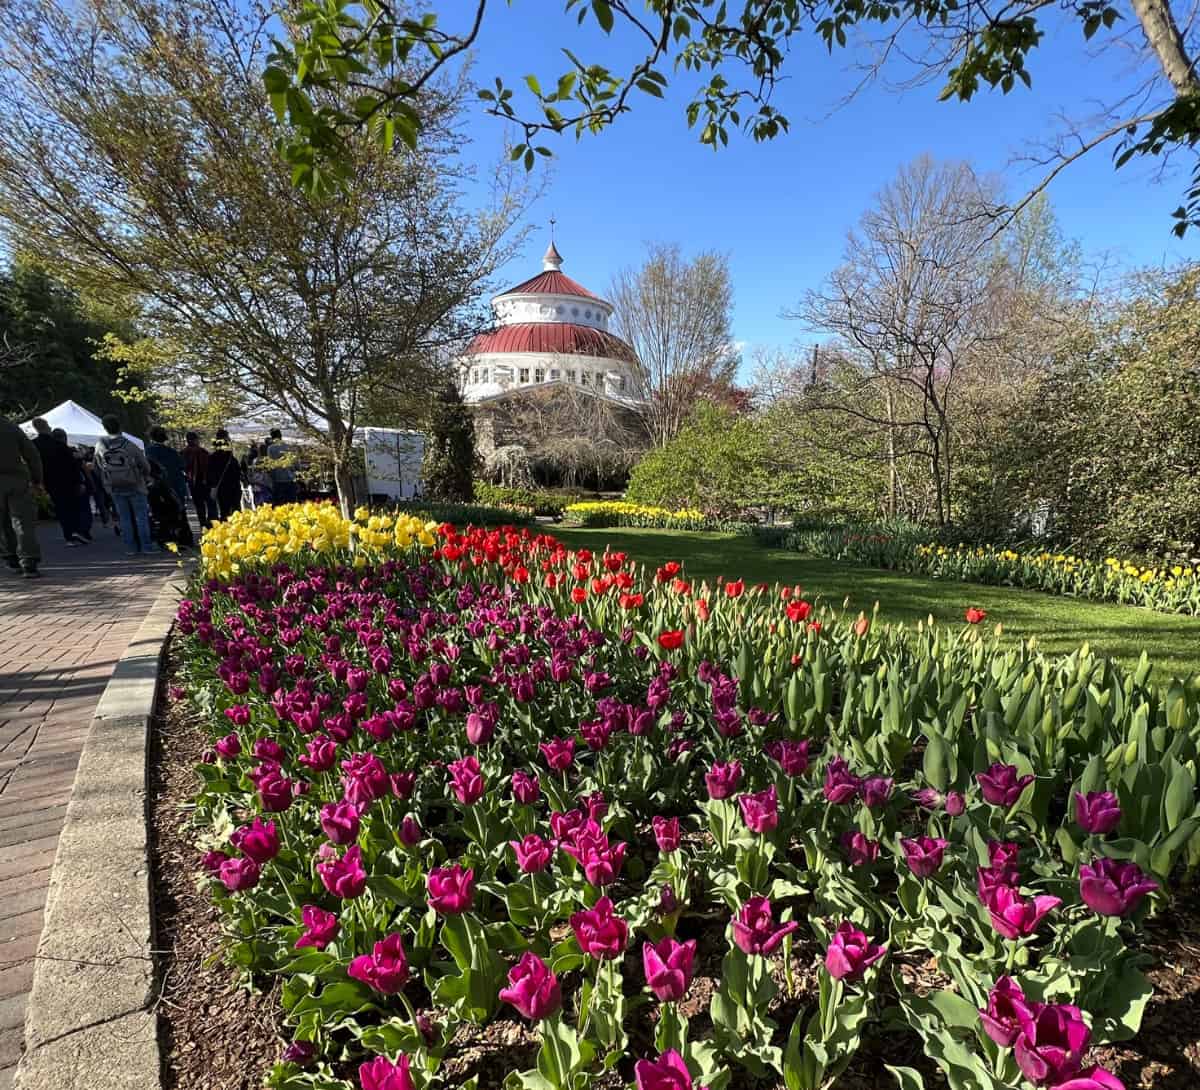 Tunes and Blooms at the Cincinnati Zoo means tulips in bloom! In the back you'll see the reptile house.